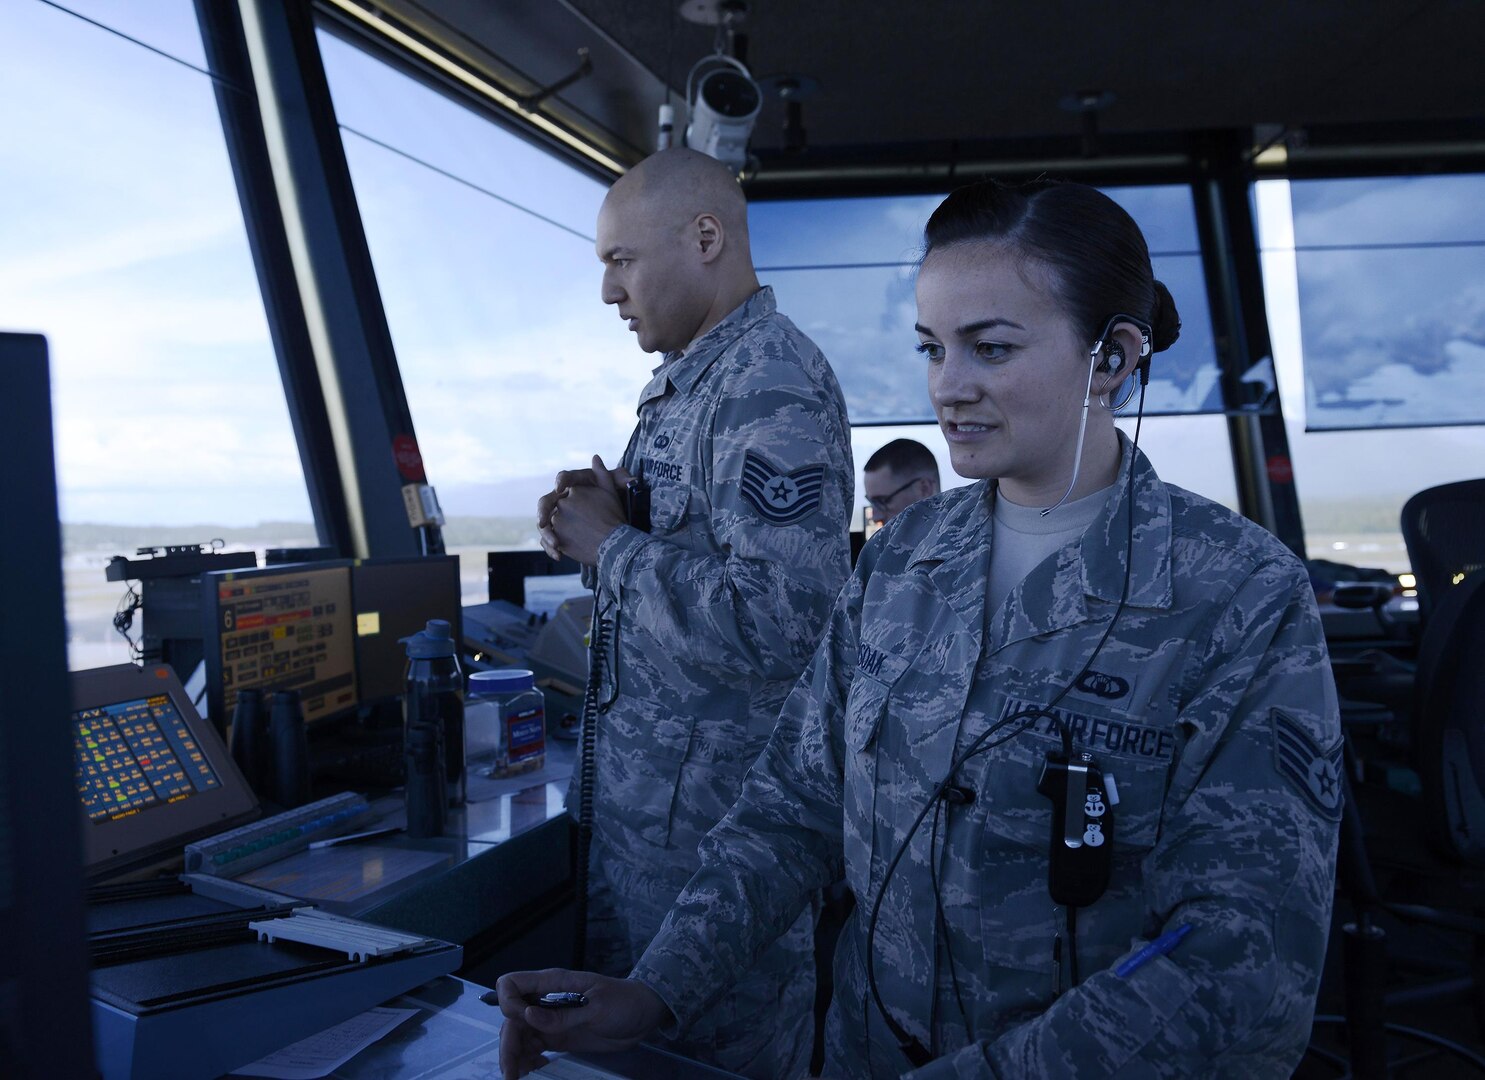 U.S. Air Force Staff Sgt. Amanda Ahsoak, air traffic control journeyman, and Tech. Sgt. Jason McLean, air traffic control tower watch supervisor, give direction to an inbound aircraft, Joint Base Elmendorf-Richardson, Alaska, June 15, 2017. ATC Airmen are responsible for the safety and control of hundreds of military and civilian aircraft every day.